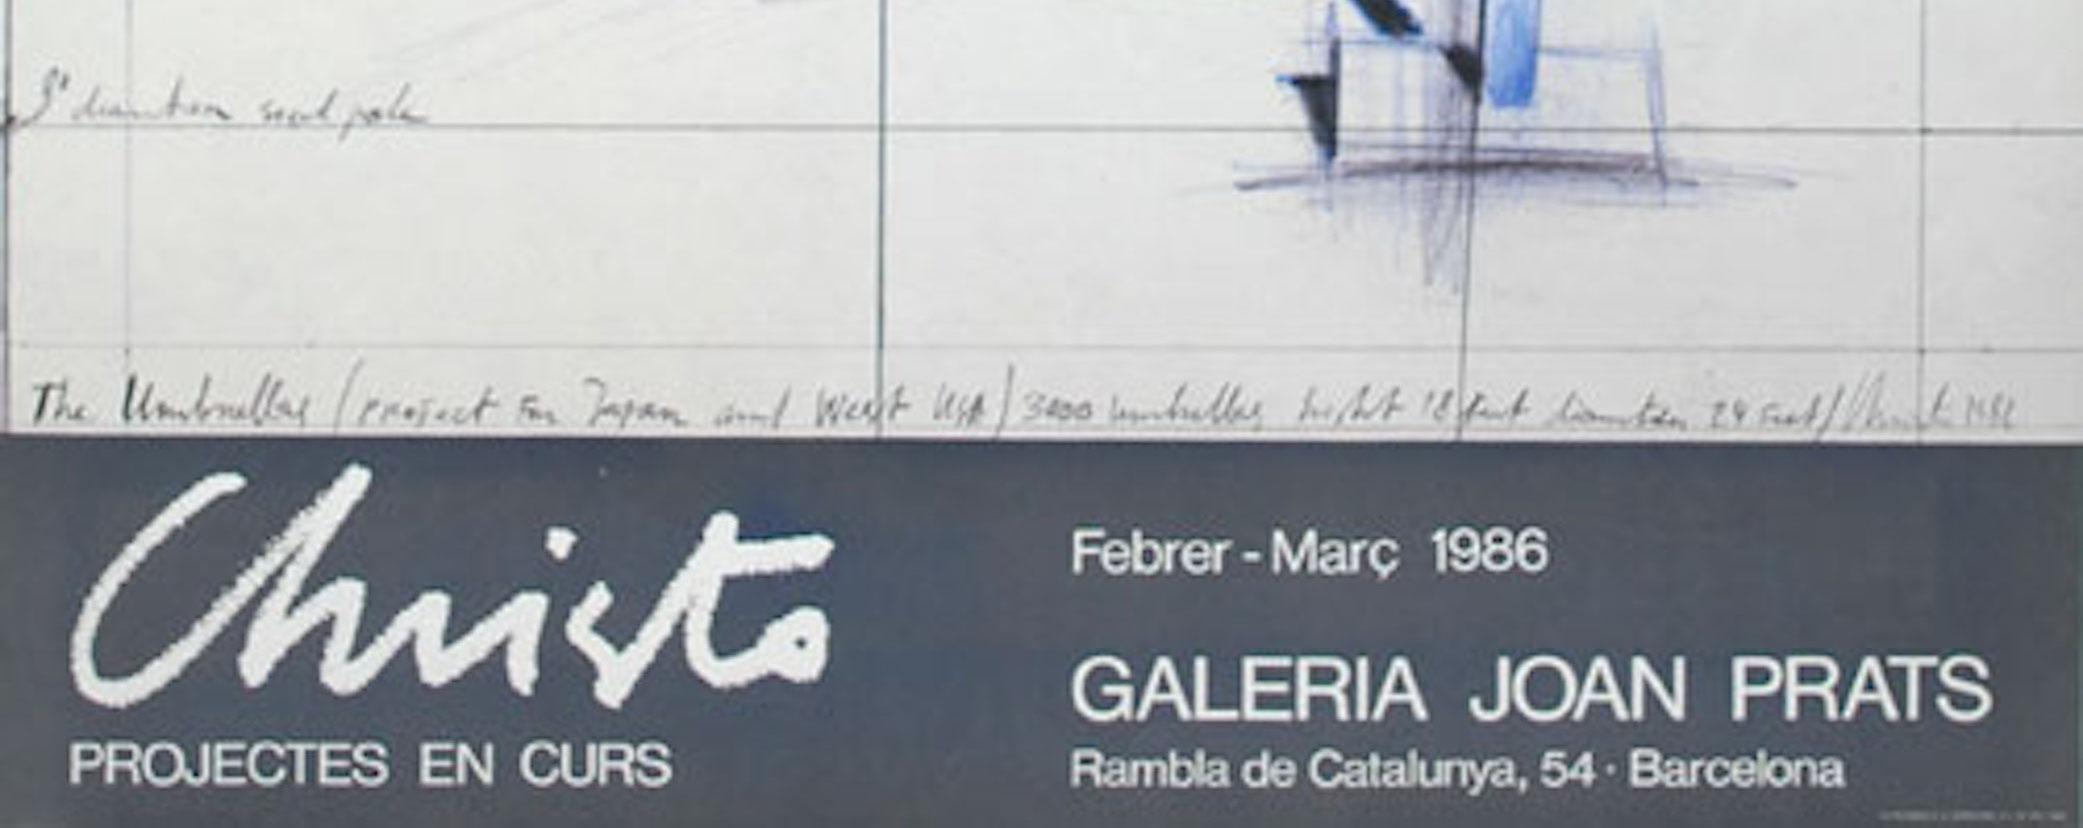 Galeria Joan Prats.
Exhibition poster - created on the occasion of the 1986 exhibition.
In great condition